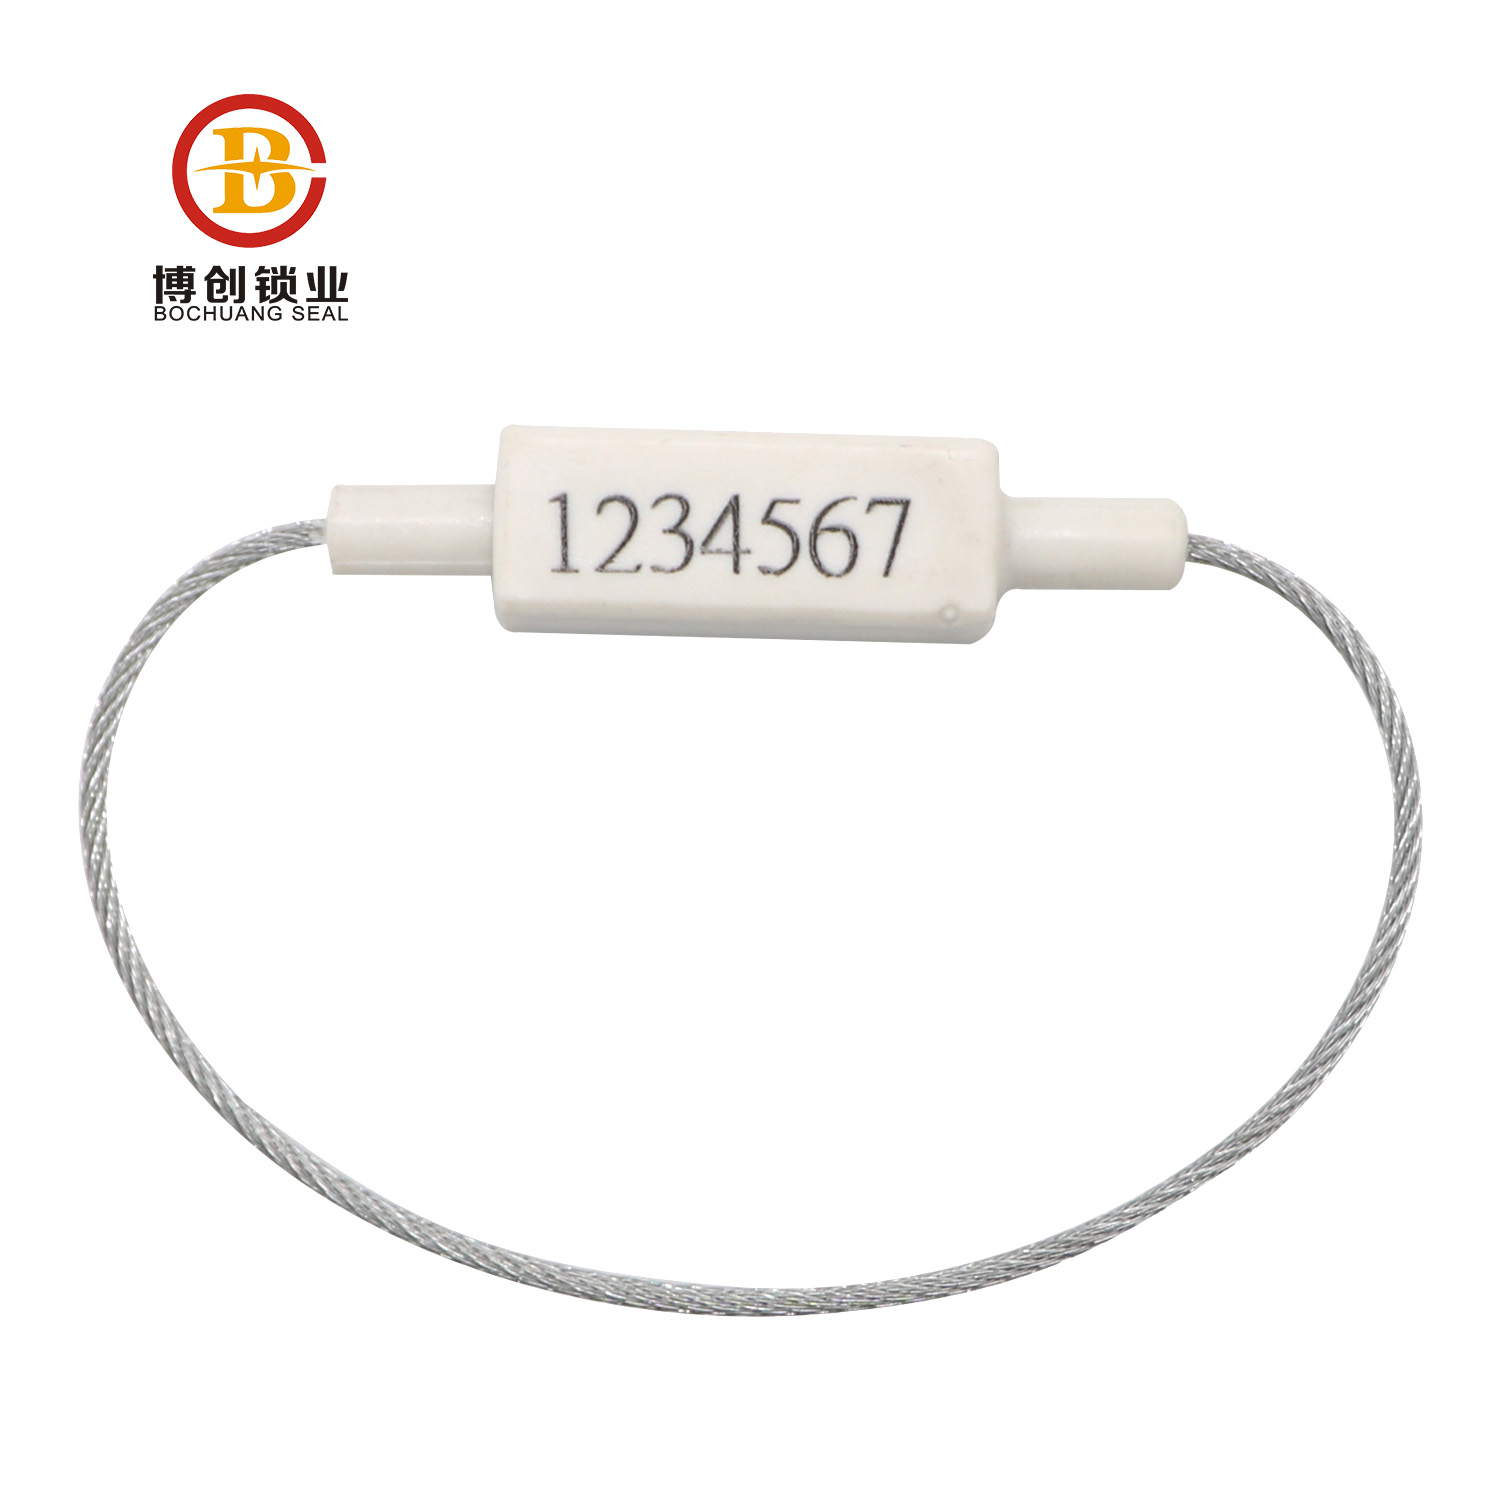 High-Volume Aluminum Alloy Wire Cable Seals